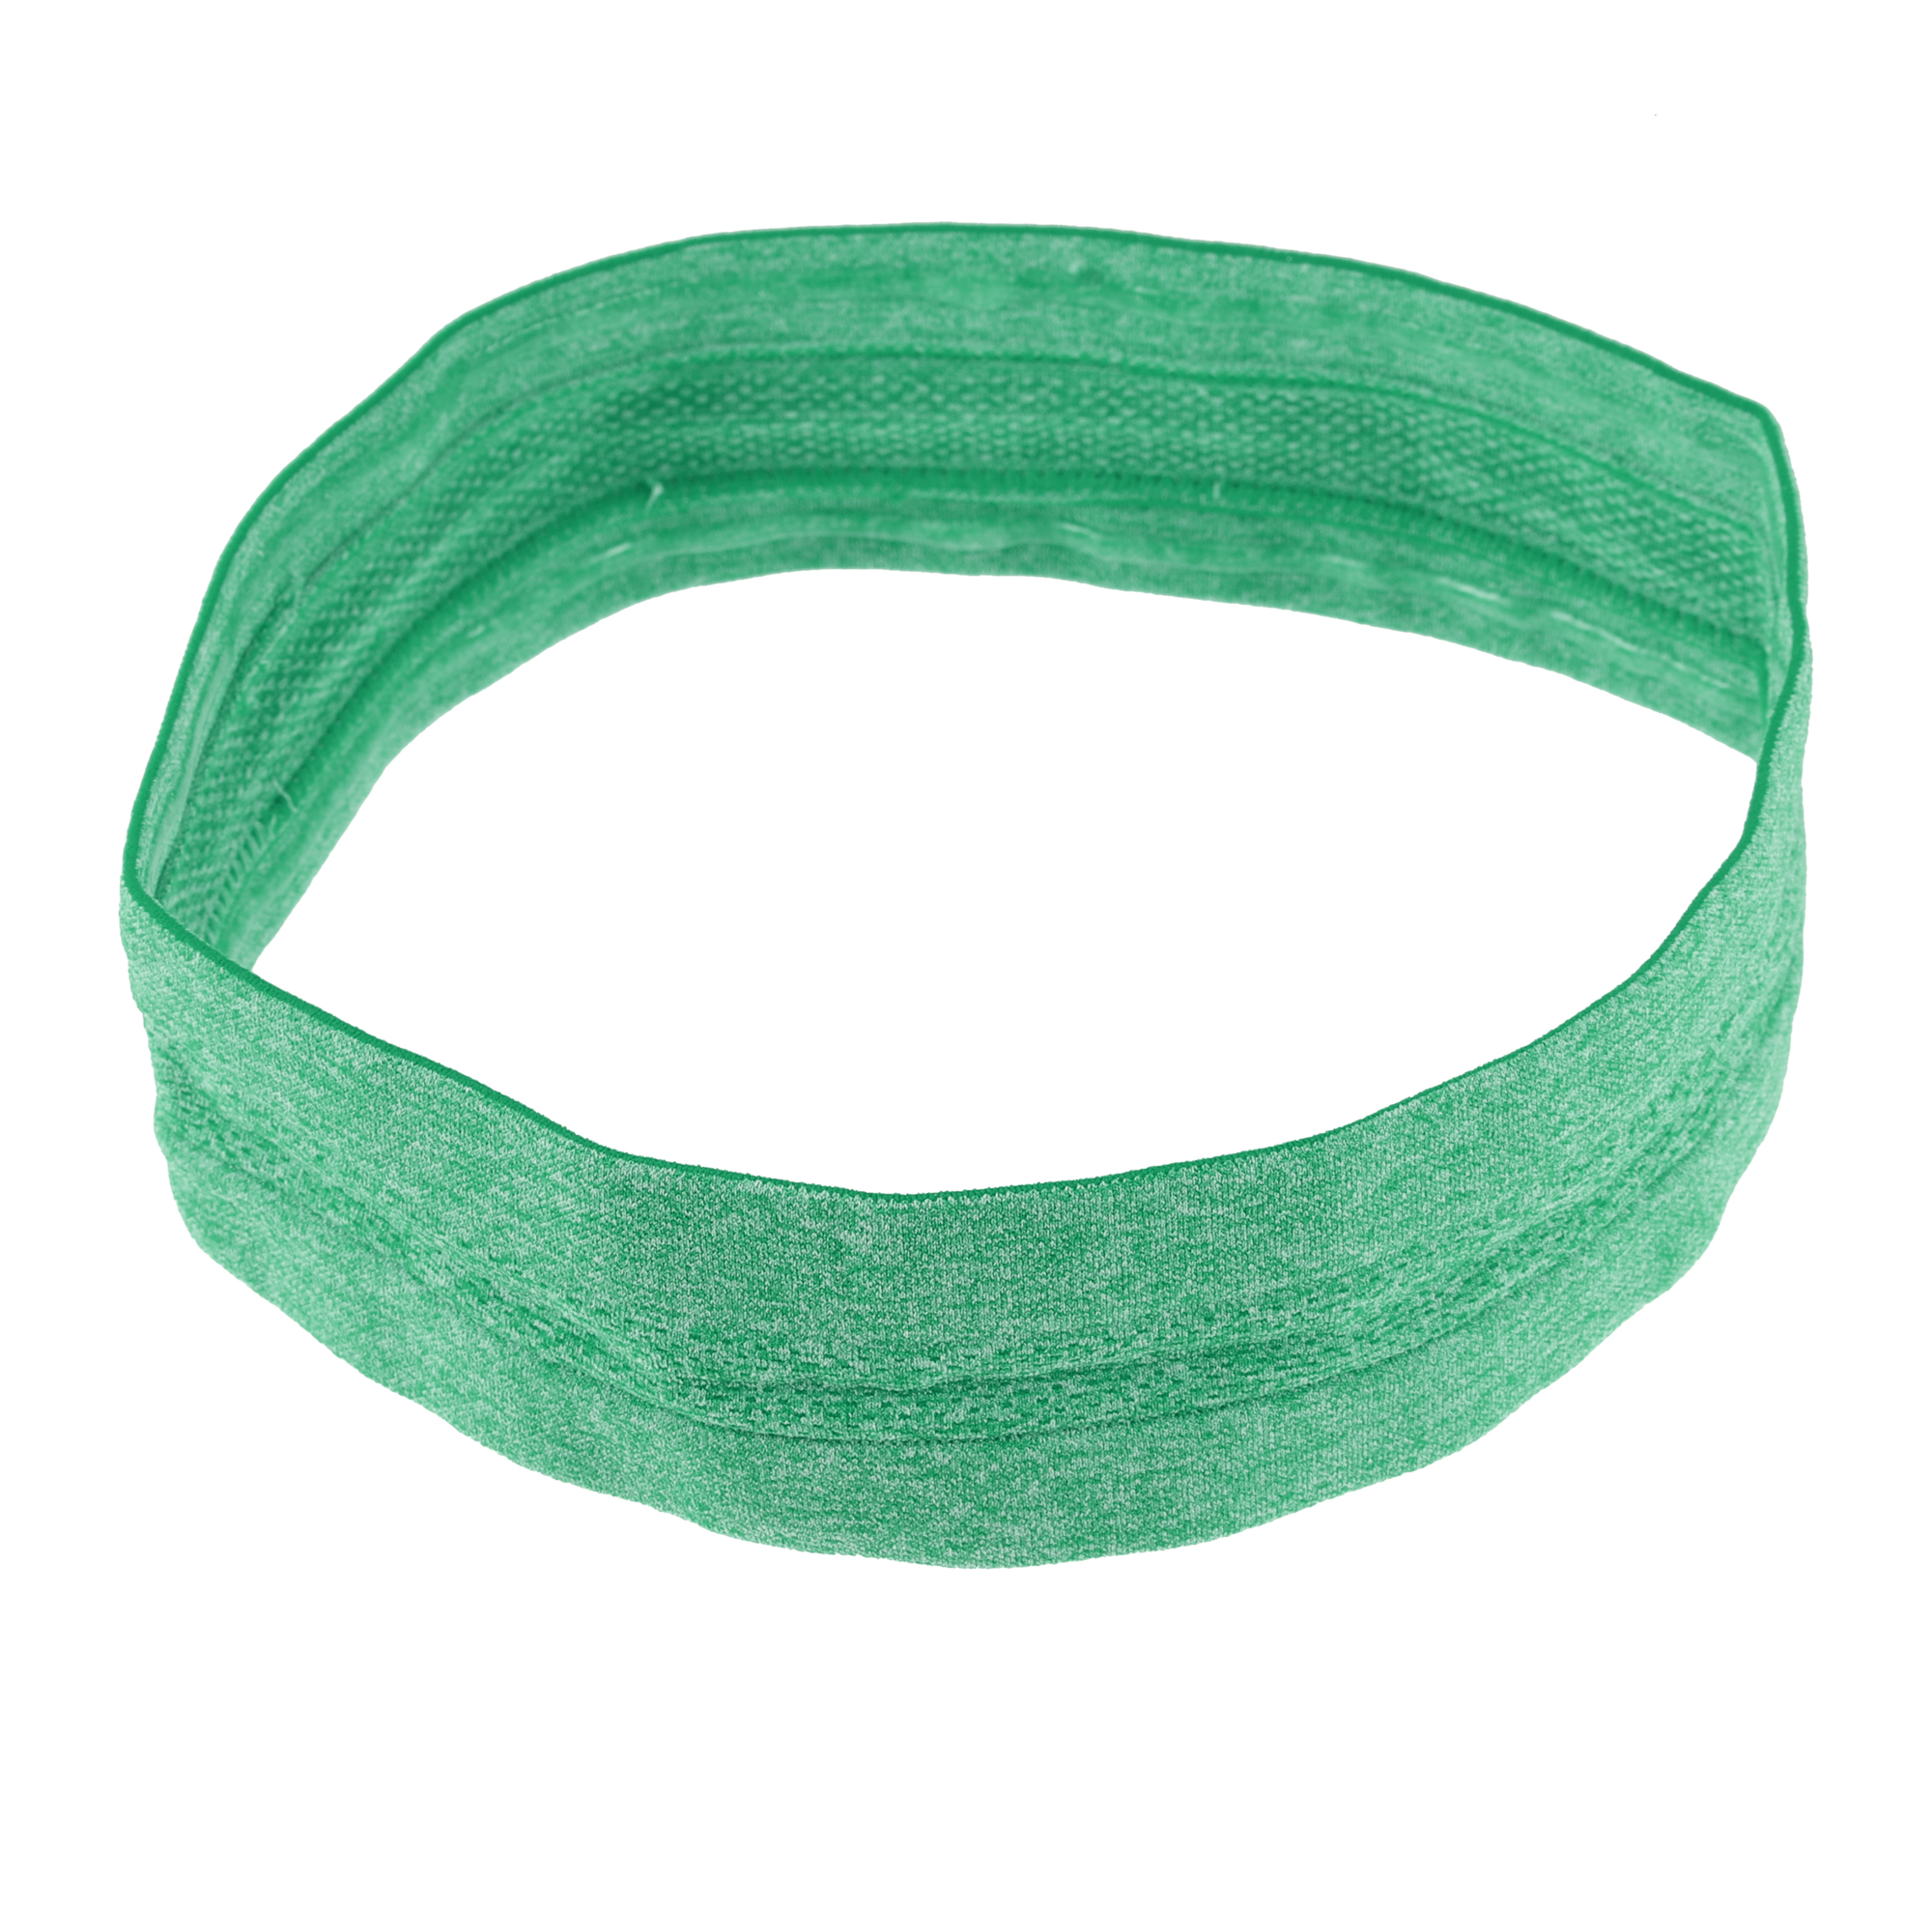 Unique Bargains 1 PCS Headbands Sweatbands Stretchy Headband for Fitness Sports Silicone Green